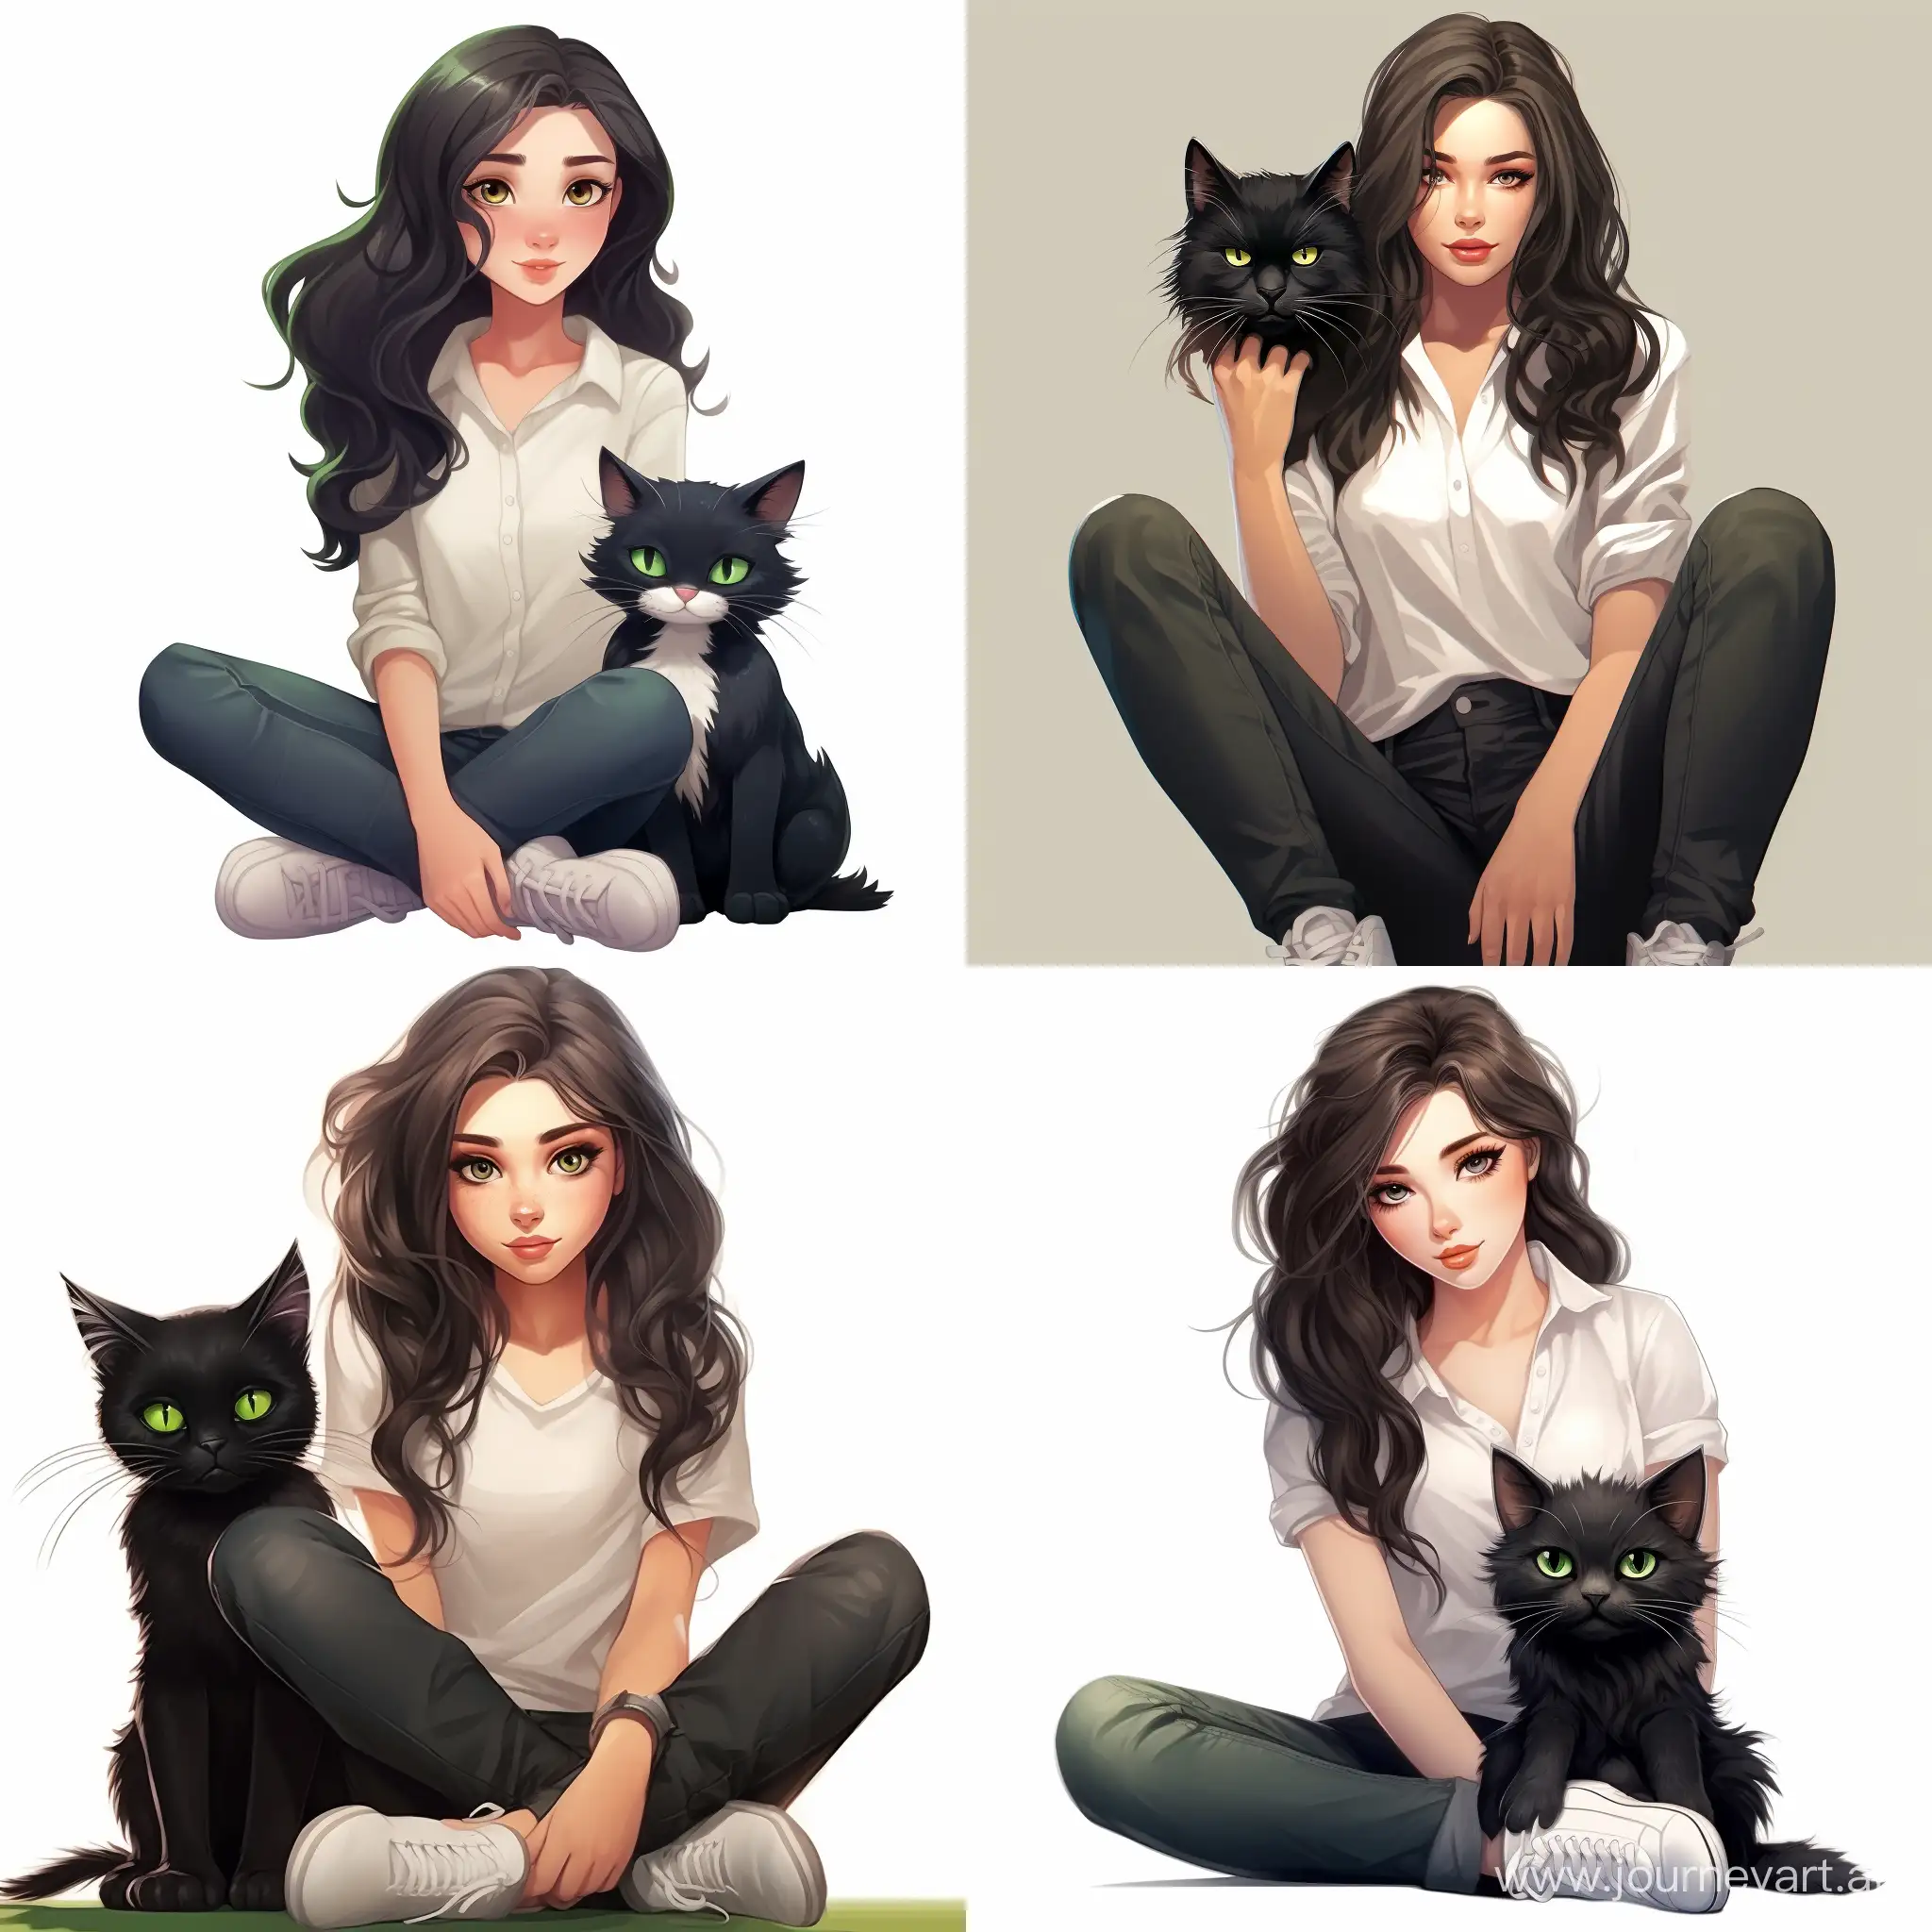 Beautiful girl, straight dark hair, expressive green eyes, snow-white skin, teenager, dressed in a shirt, jeans and sneakers, black cat, high quality, high detail, cartoon art